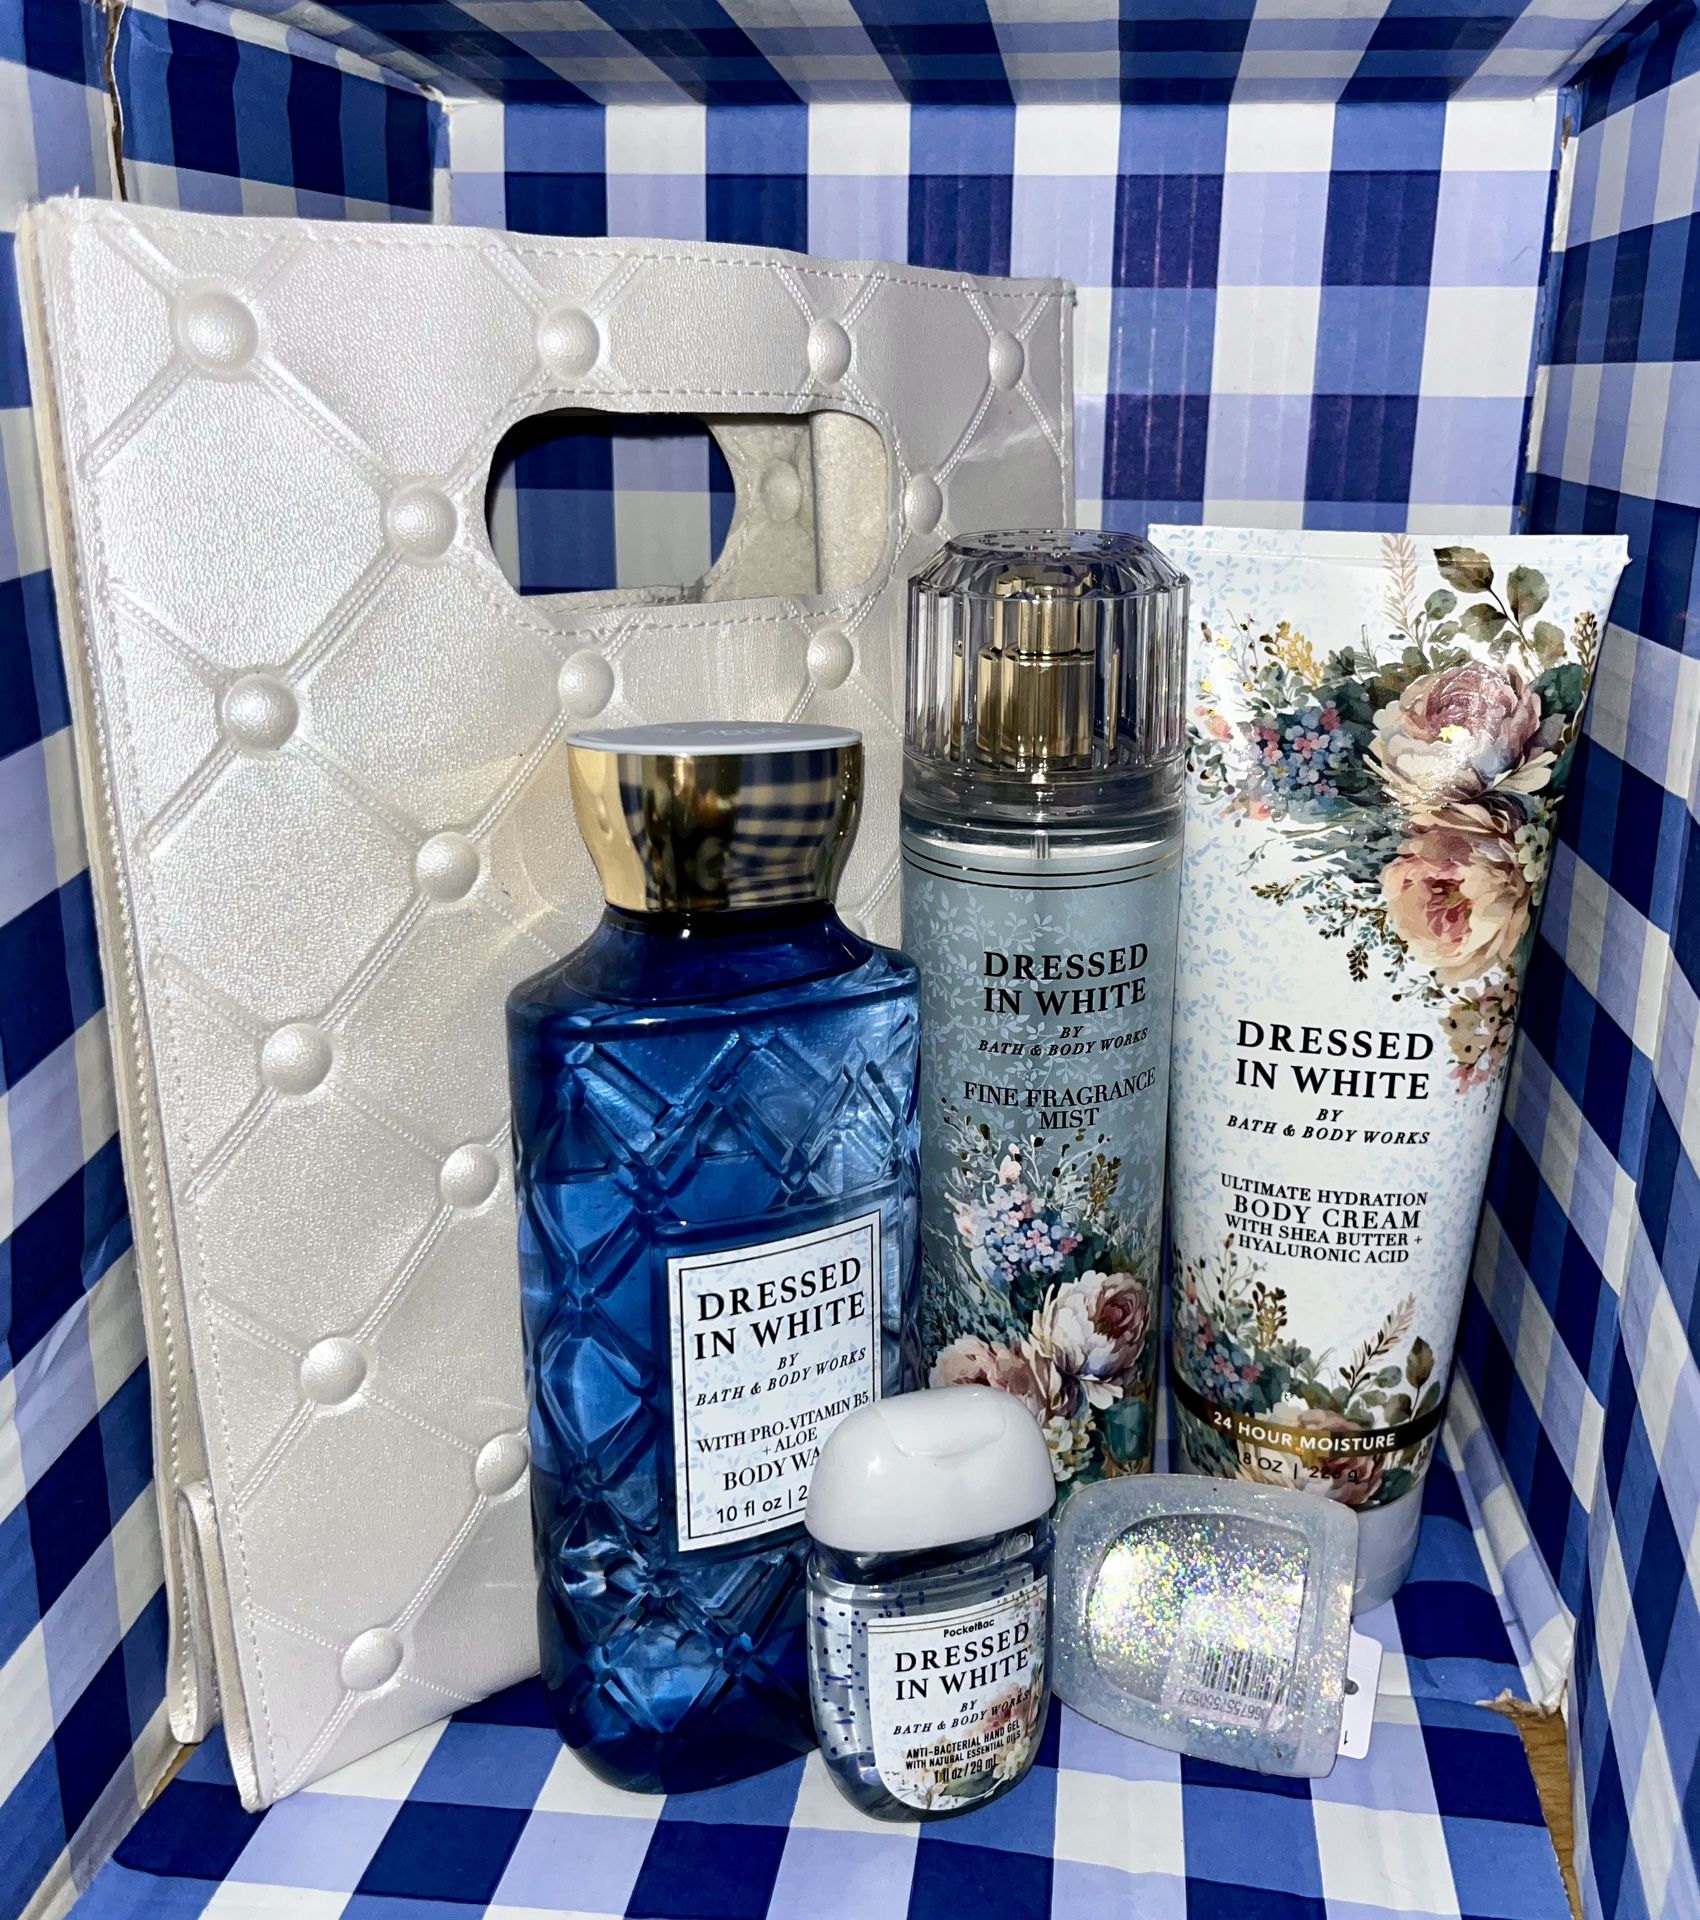 Gift set from Bath & Body Works